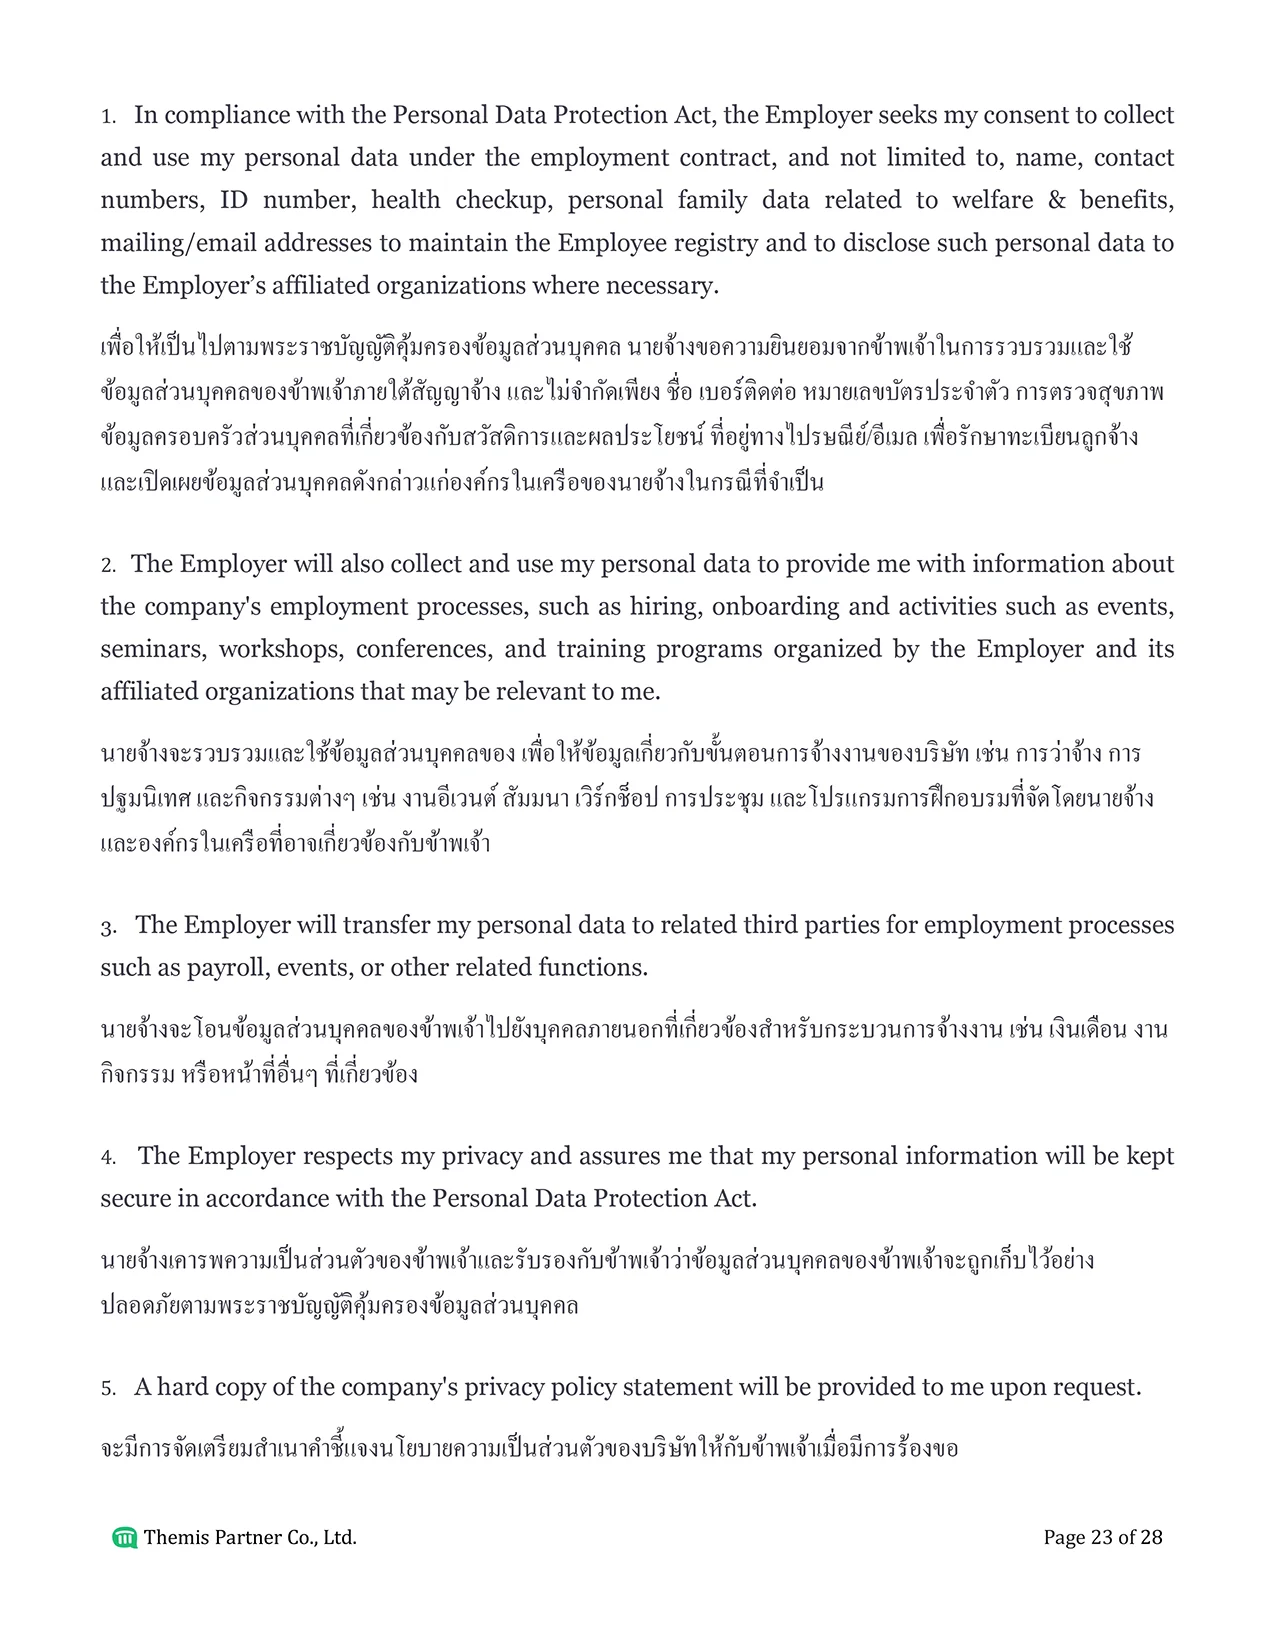 PDPA consent form and company policy Thailand 23